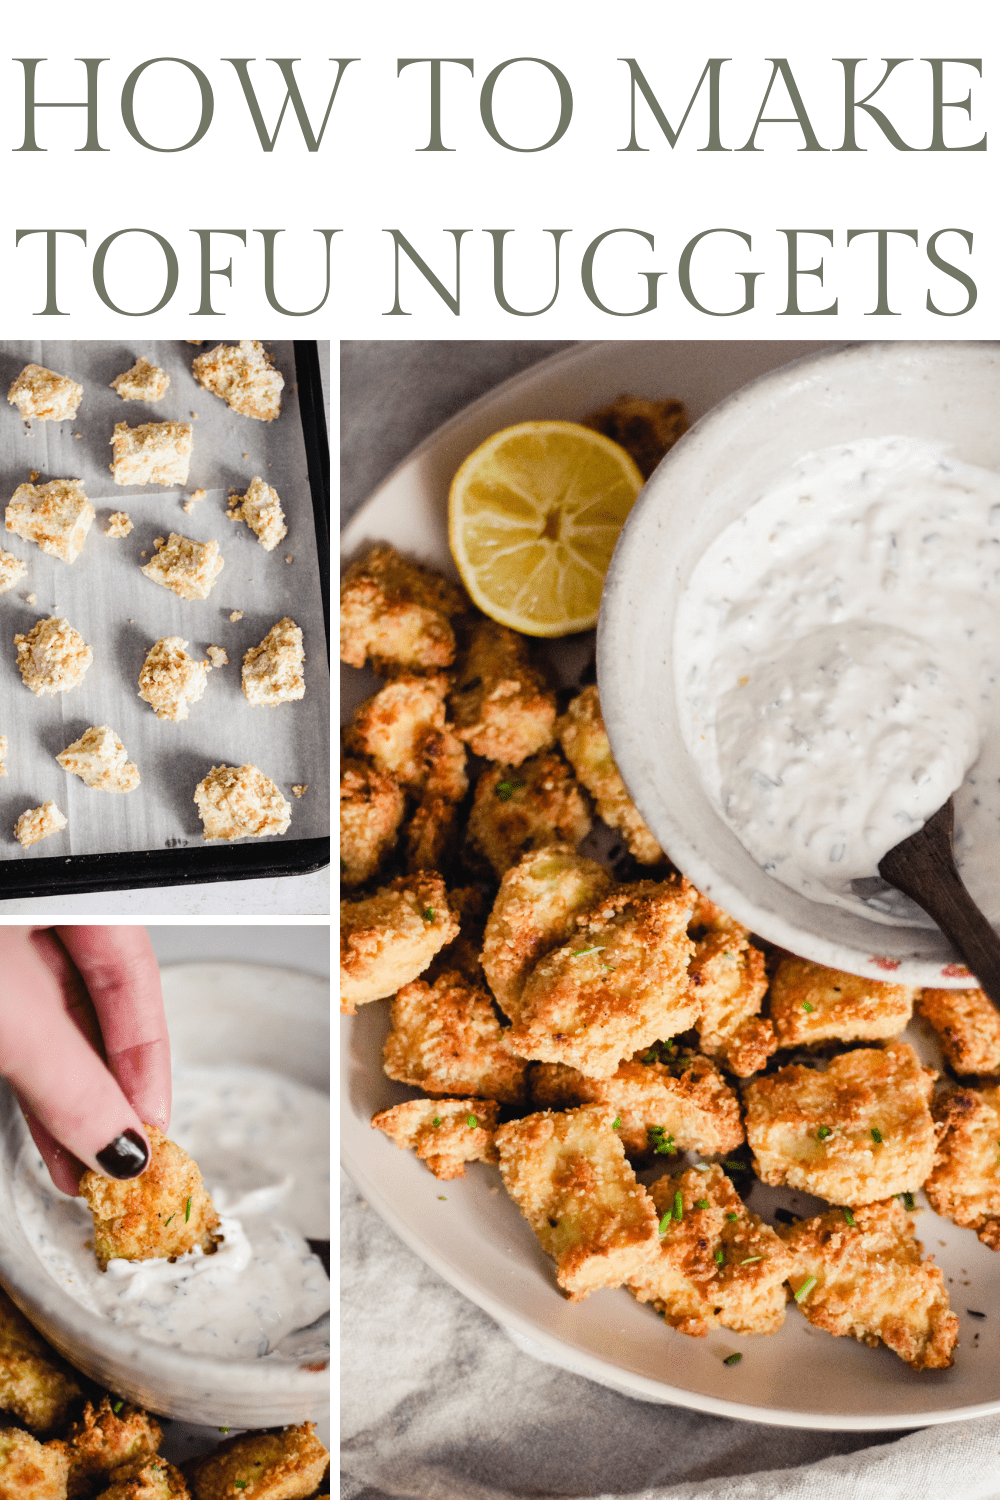 Image collage featuring the top left image of breaded tofu on a baking sheet before baking, the bottom left image of a hand dipping a tofu nugget into yogurt ranch sauce, the right image of tofu nuggets finished in a plate with yogurt ranch sauce.  text reads 